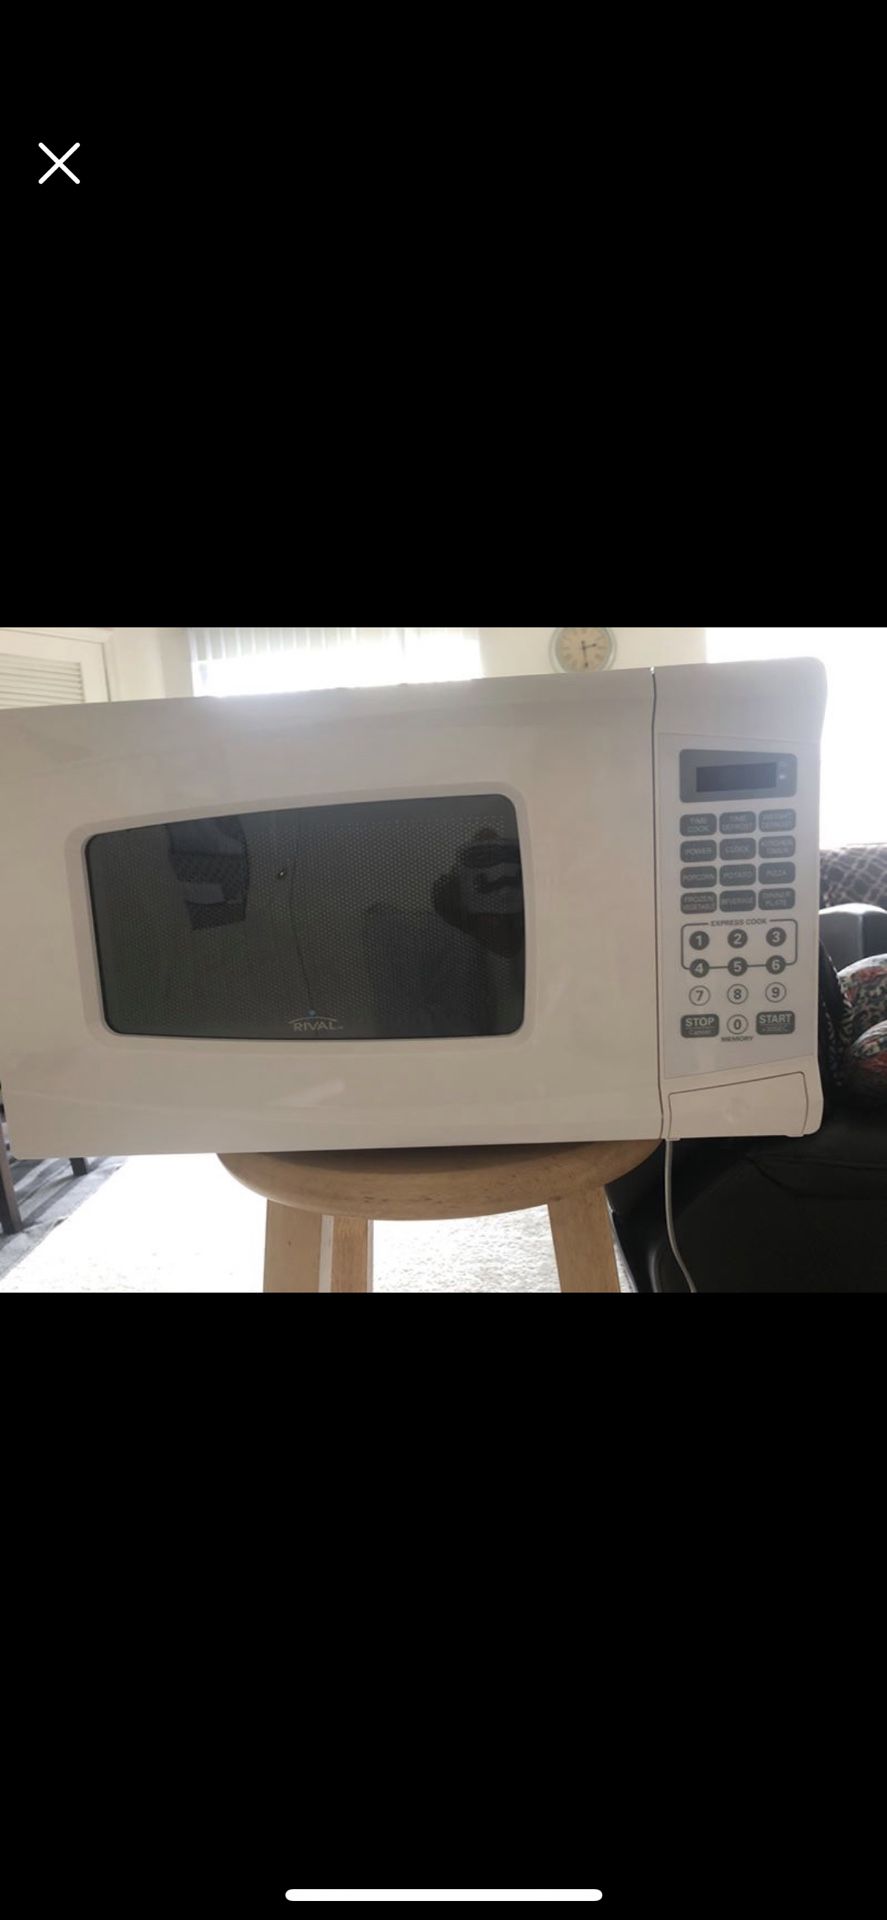 Rival 0.7 cu. ft. Microwave Oven